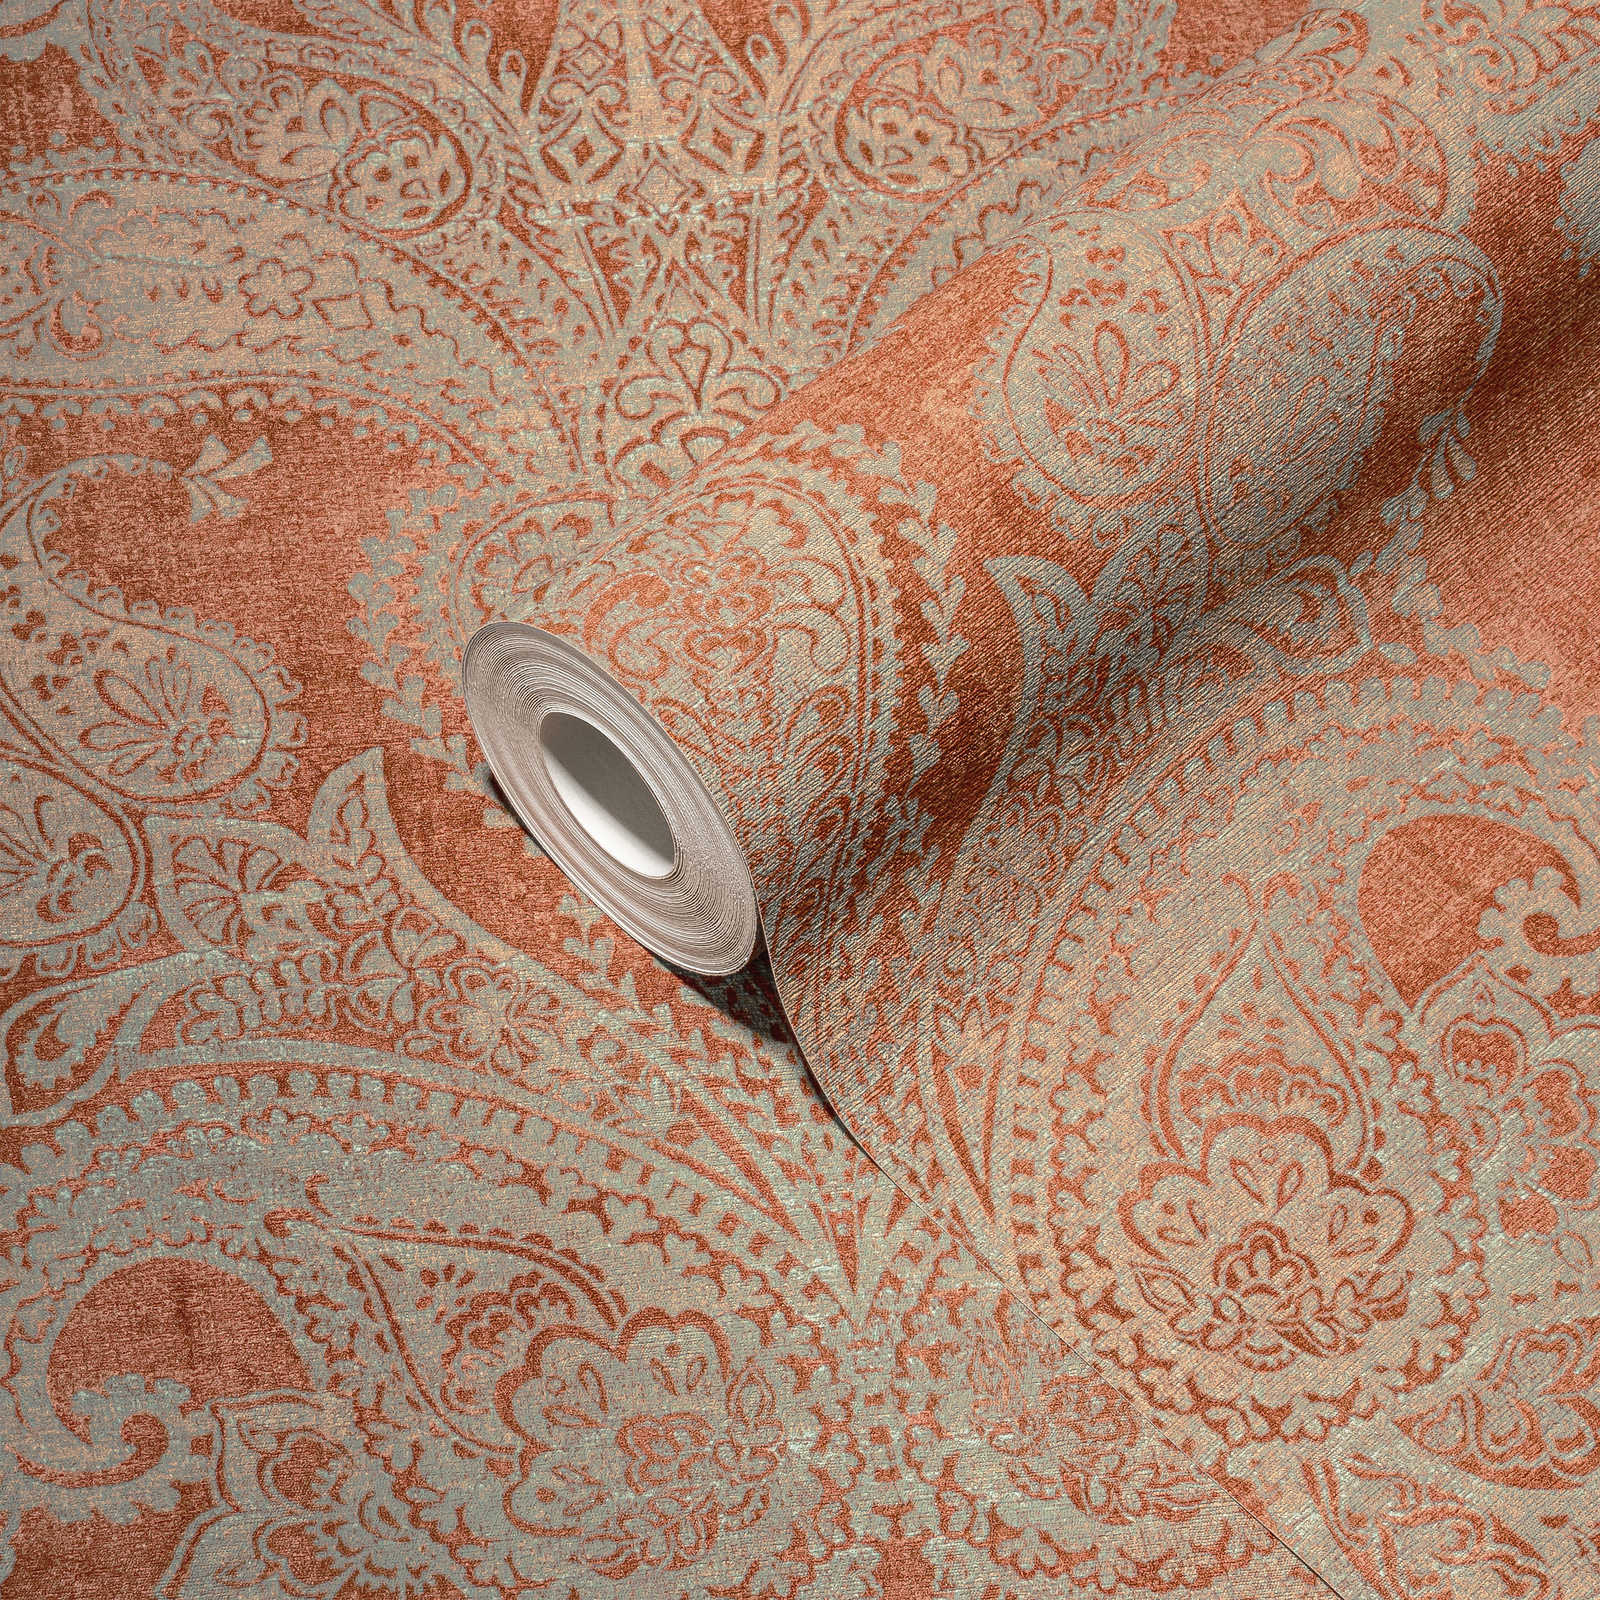             Non-woven wallpaper in baroque style with ornaments - orange, turquoise, grey
        